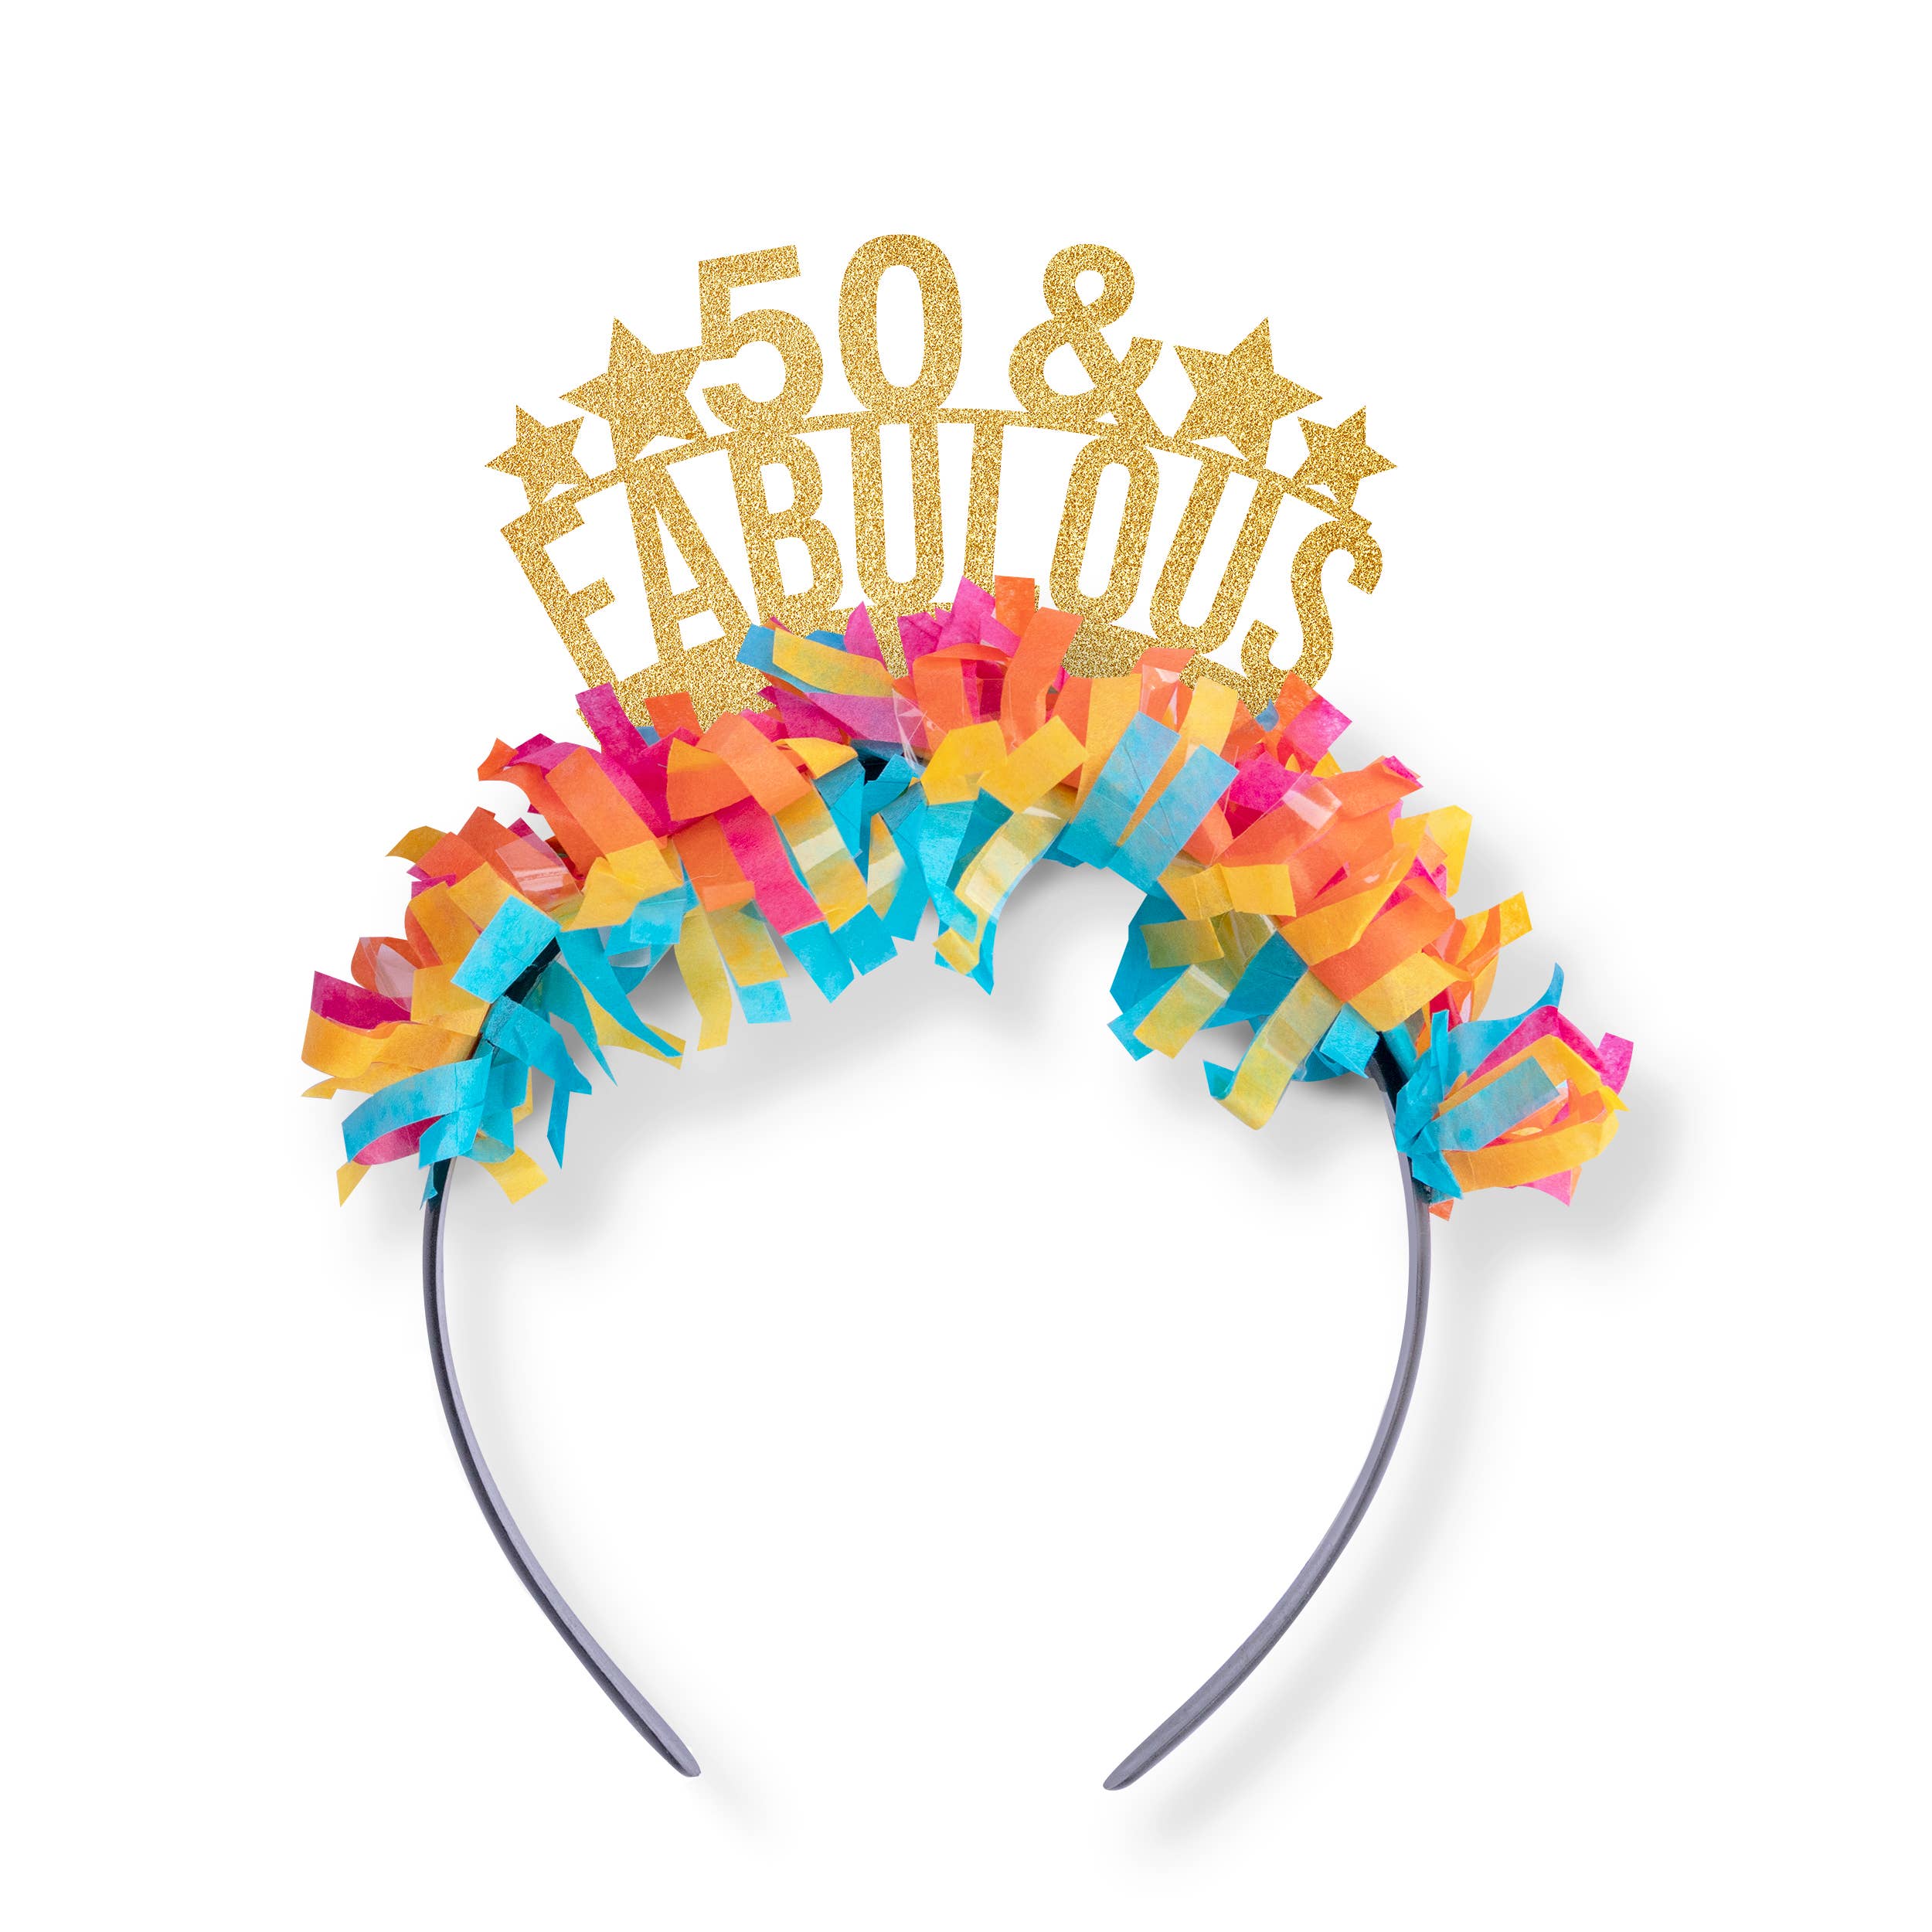 50 and Fabulous Birthday Crown